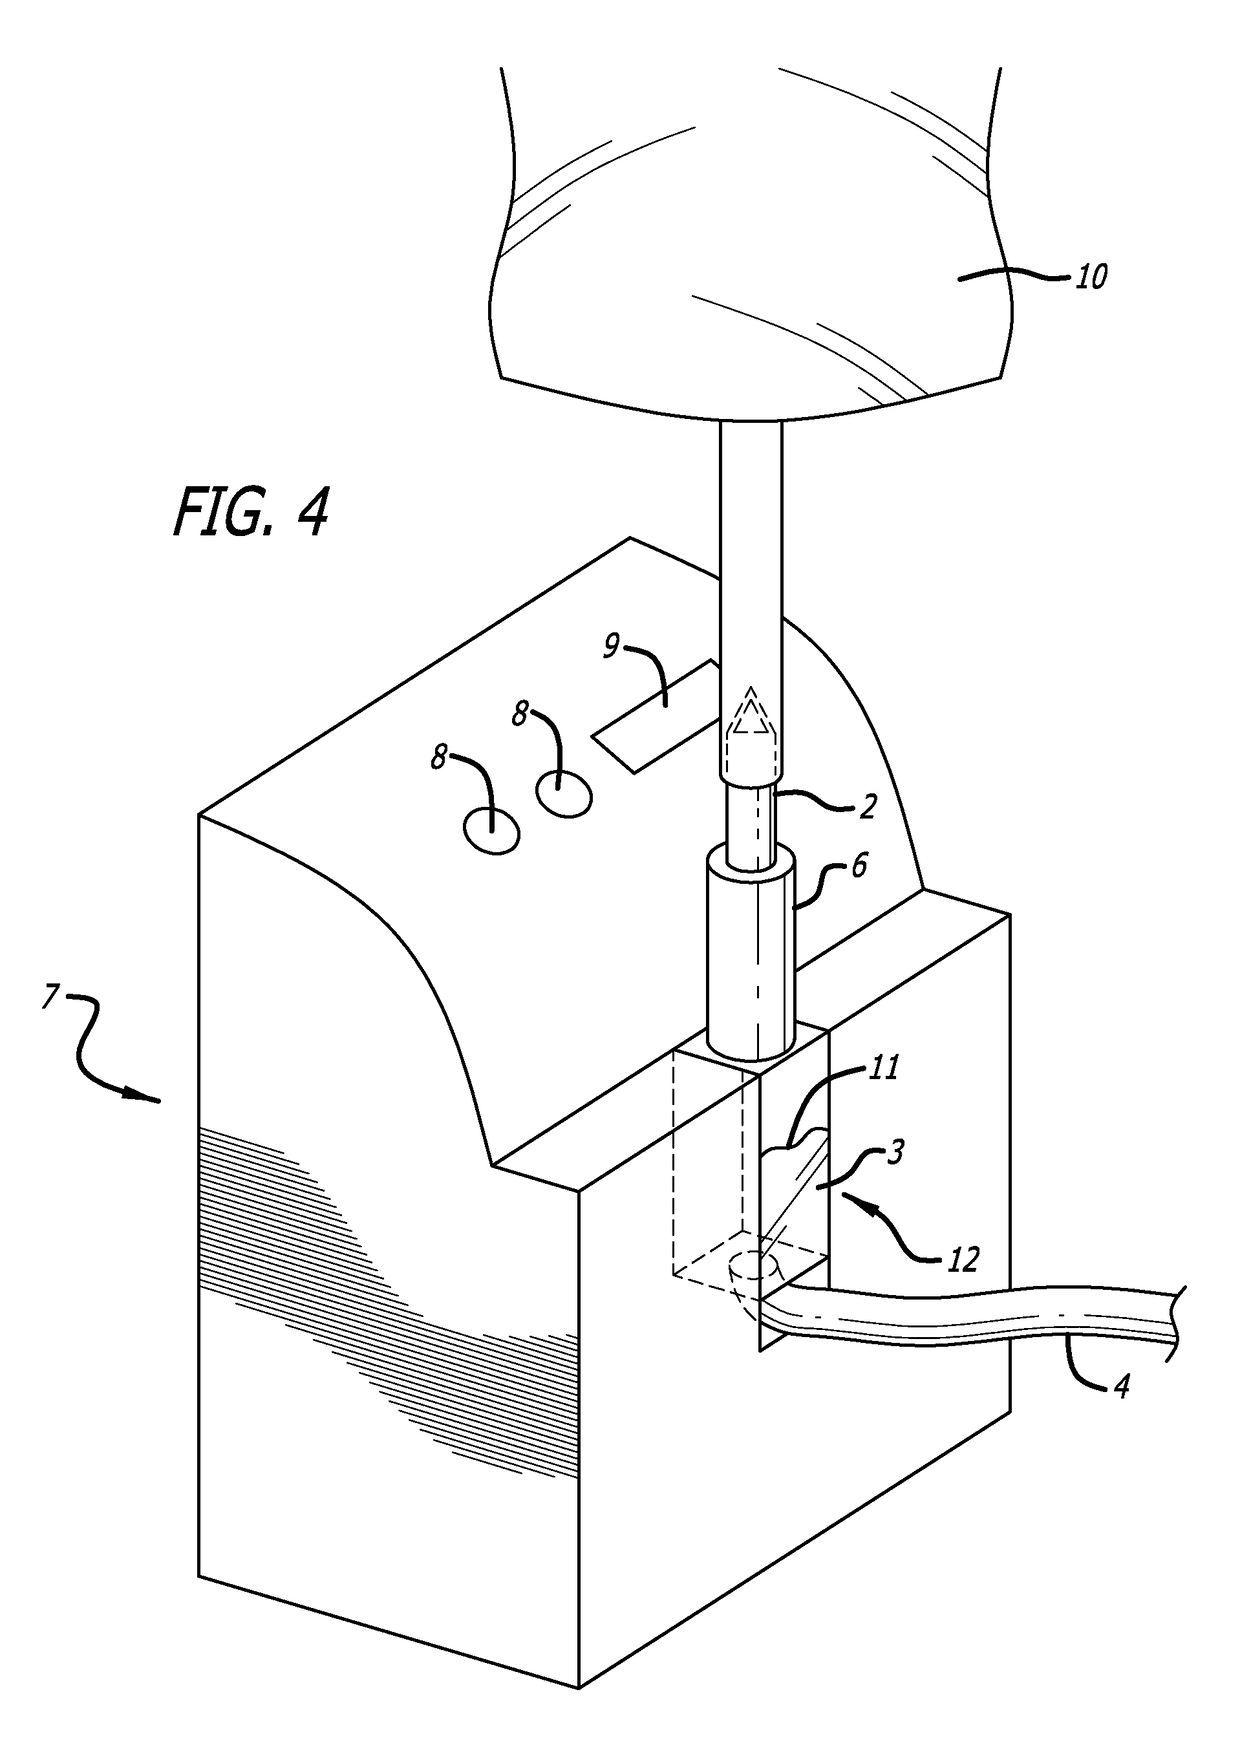 Infusion set and adapter for spectroscopic analysis of pharmaceuticals